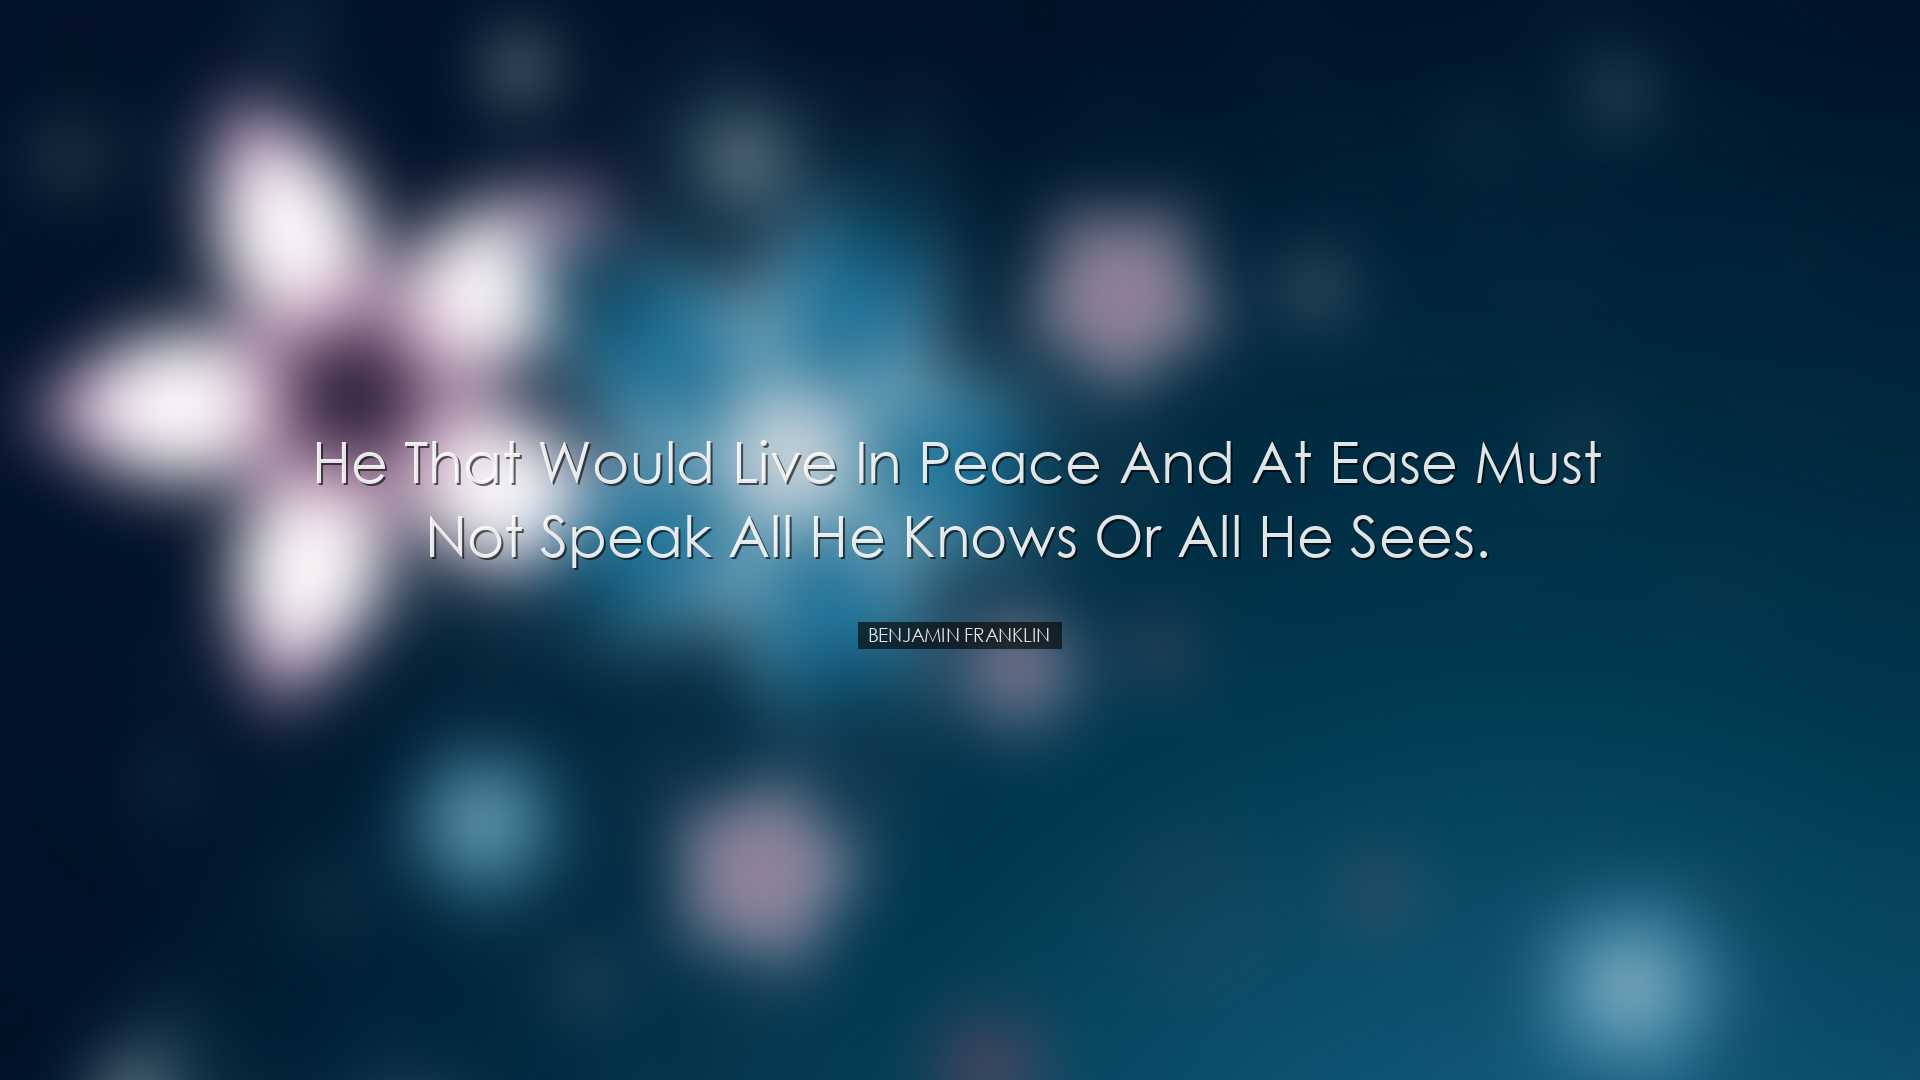 He that would live in peace and at ease must not speak all he know